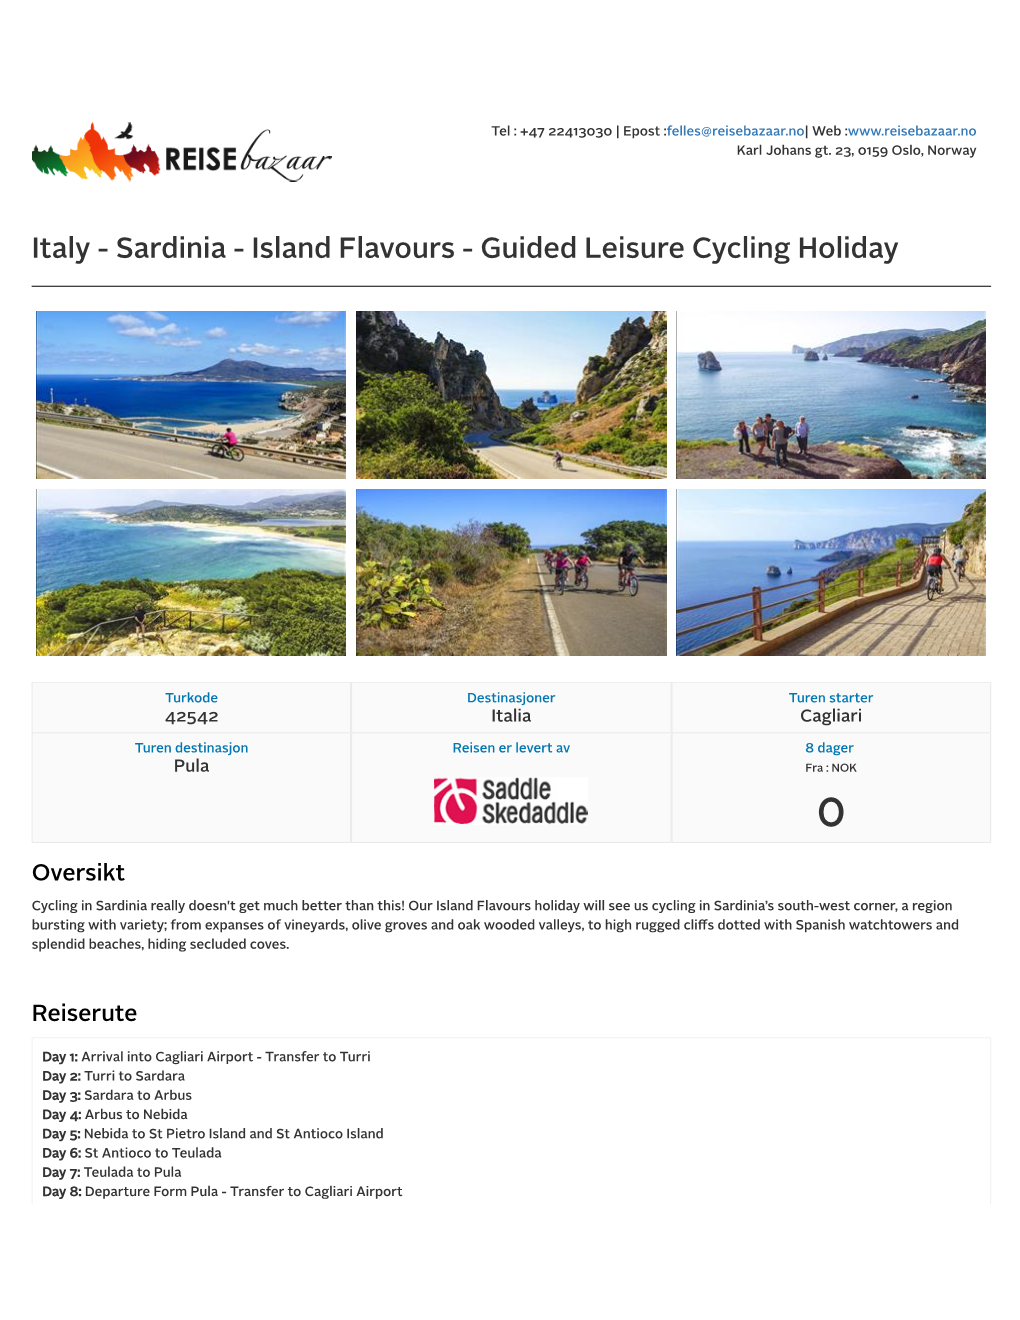 Sardinia - Island Flavours - Guided Leisure Cycling Holiday